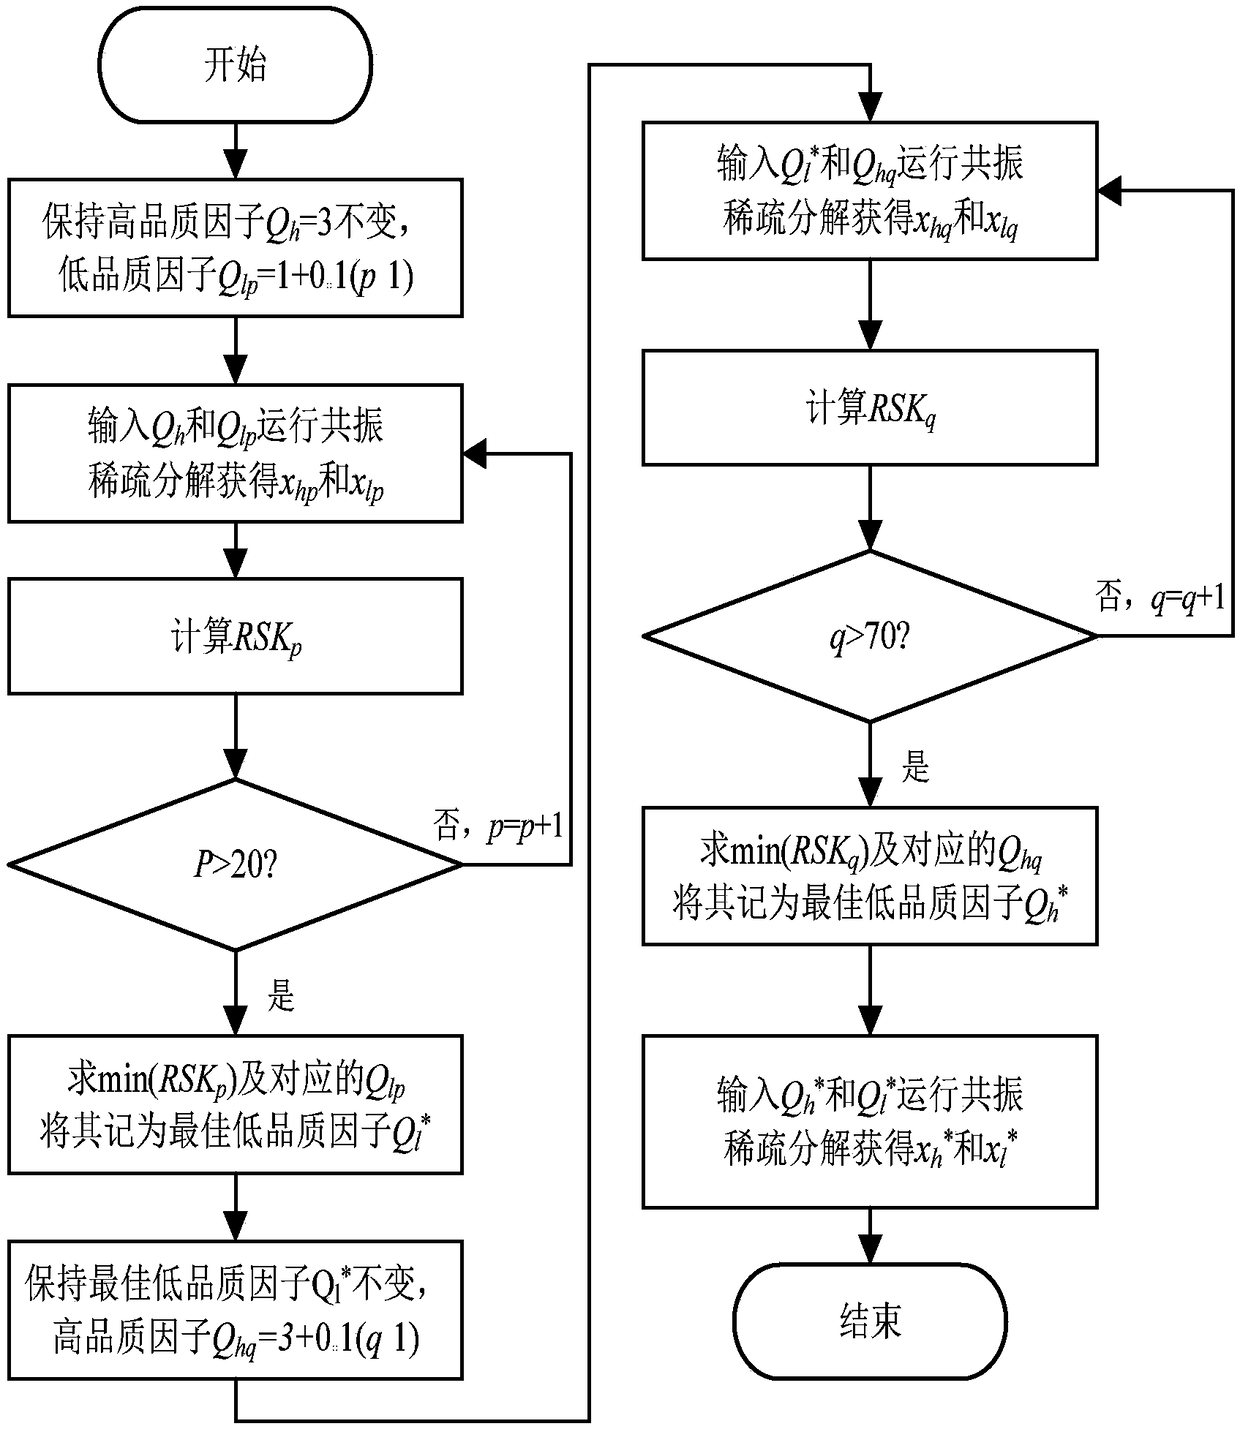 Automobile hub bearing fault feature extraction method based on optimal quality factor selection